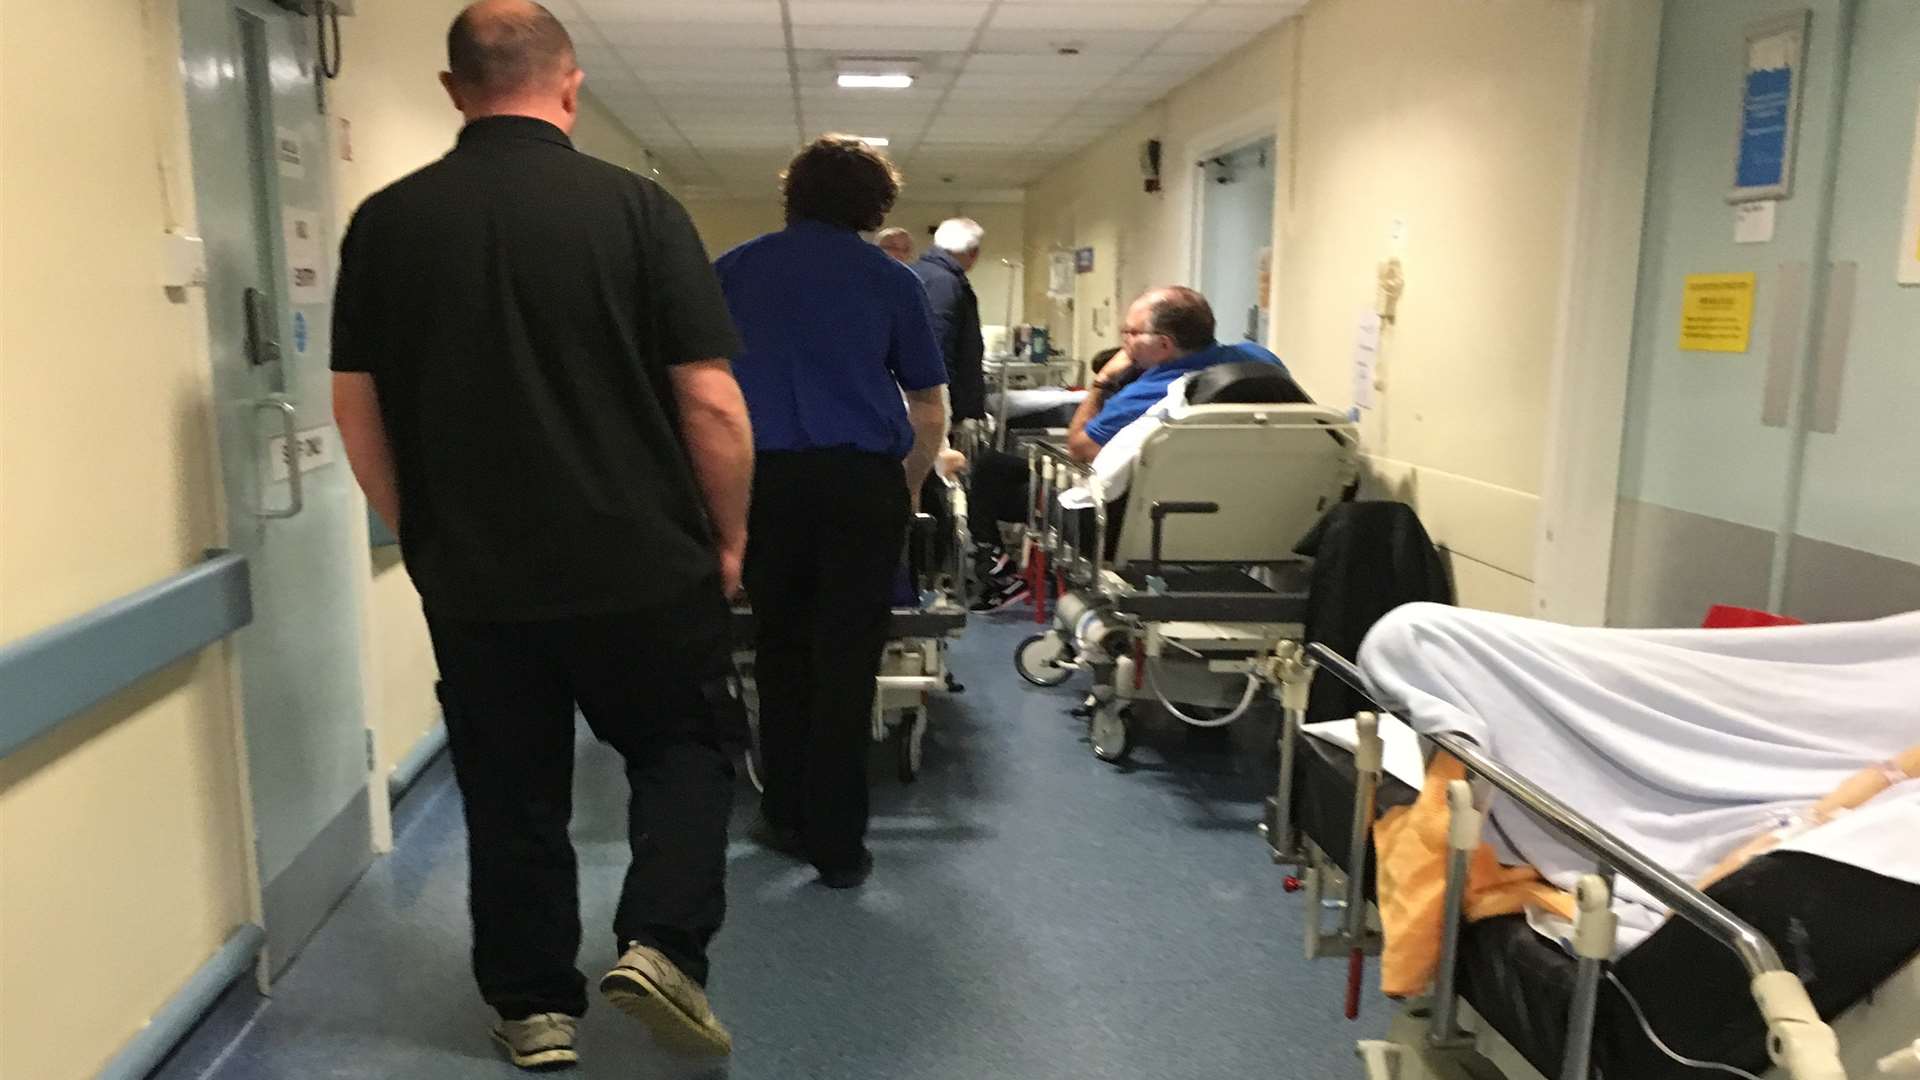 Patients waiting in corridors in Medway A&E